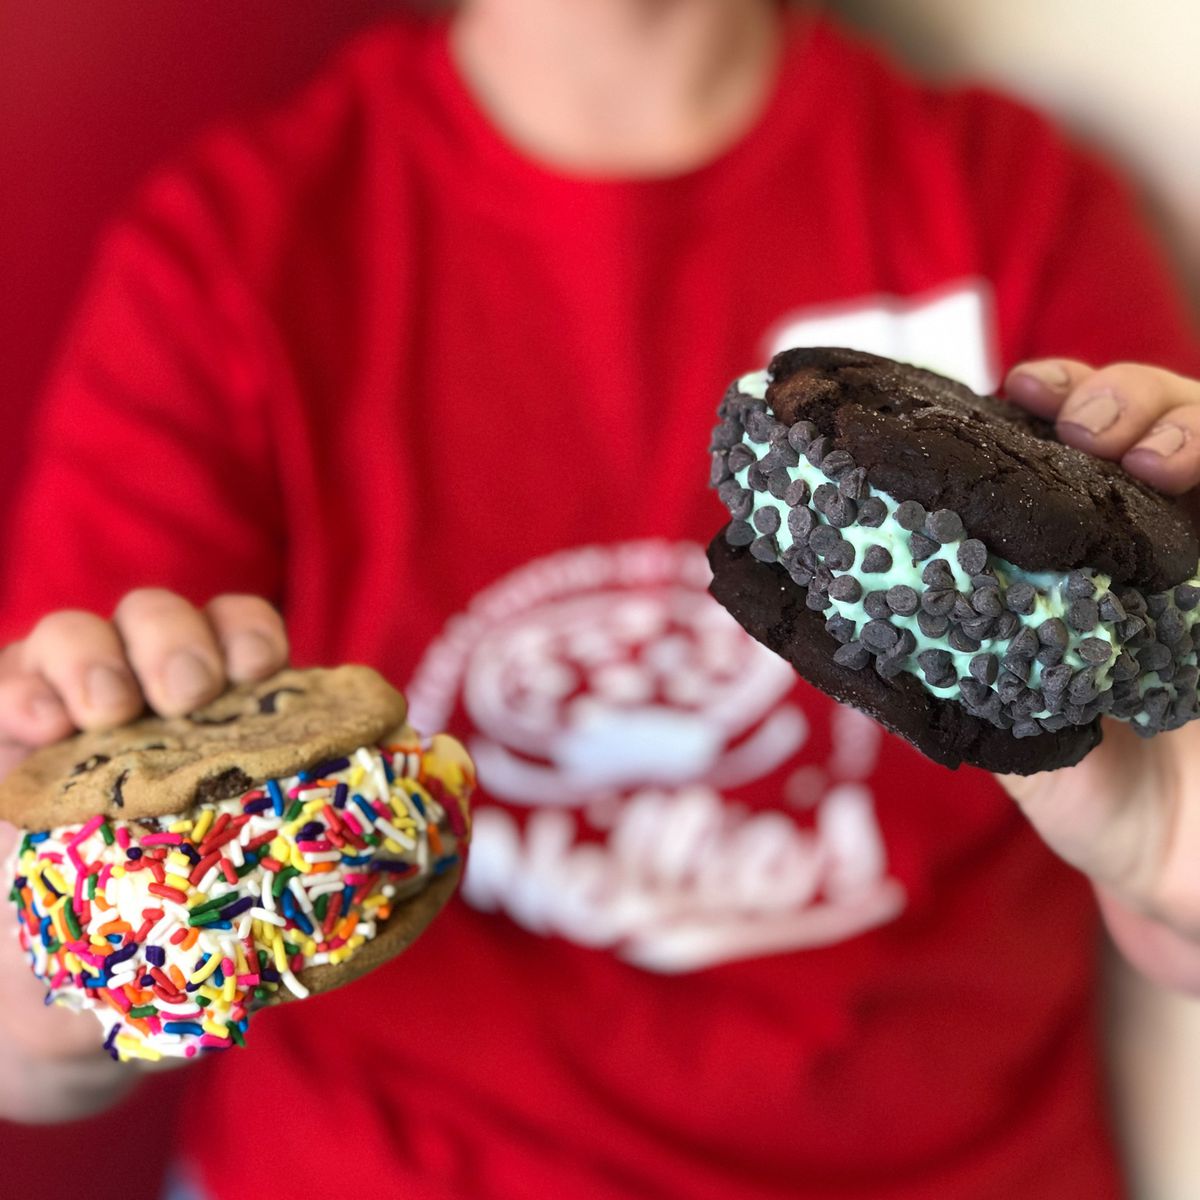 A worker in a red shirt holds two ice cream sandwiches, one with chocolate chips and the other with rainbow sprinkles